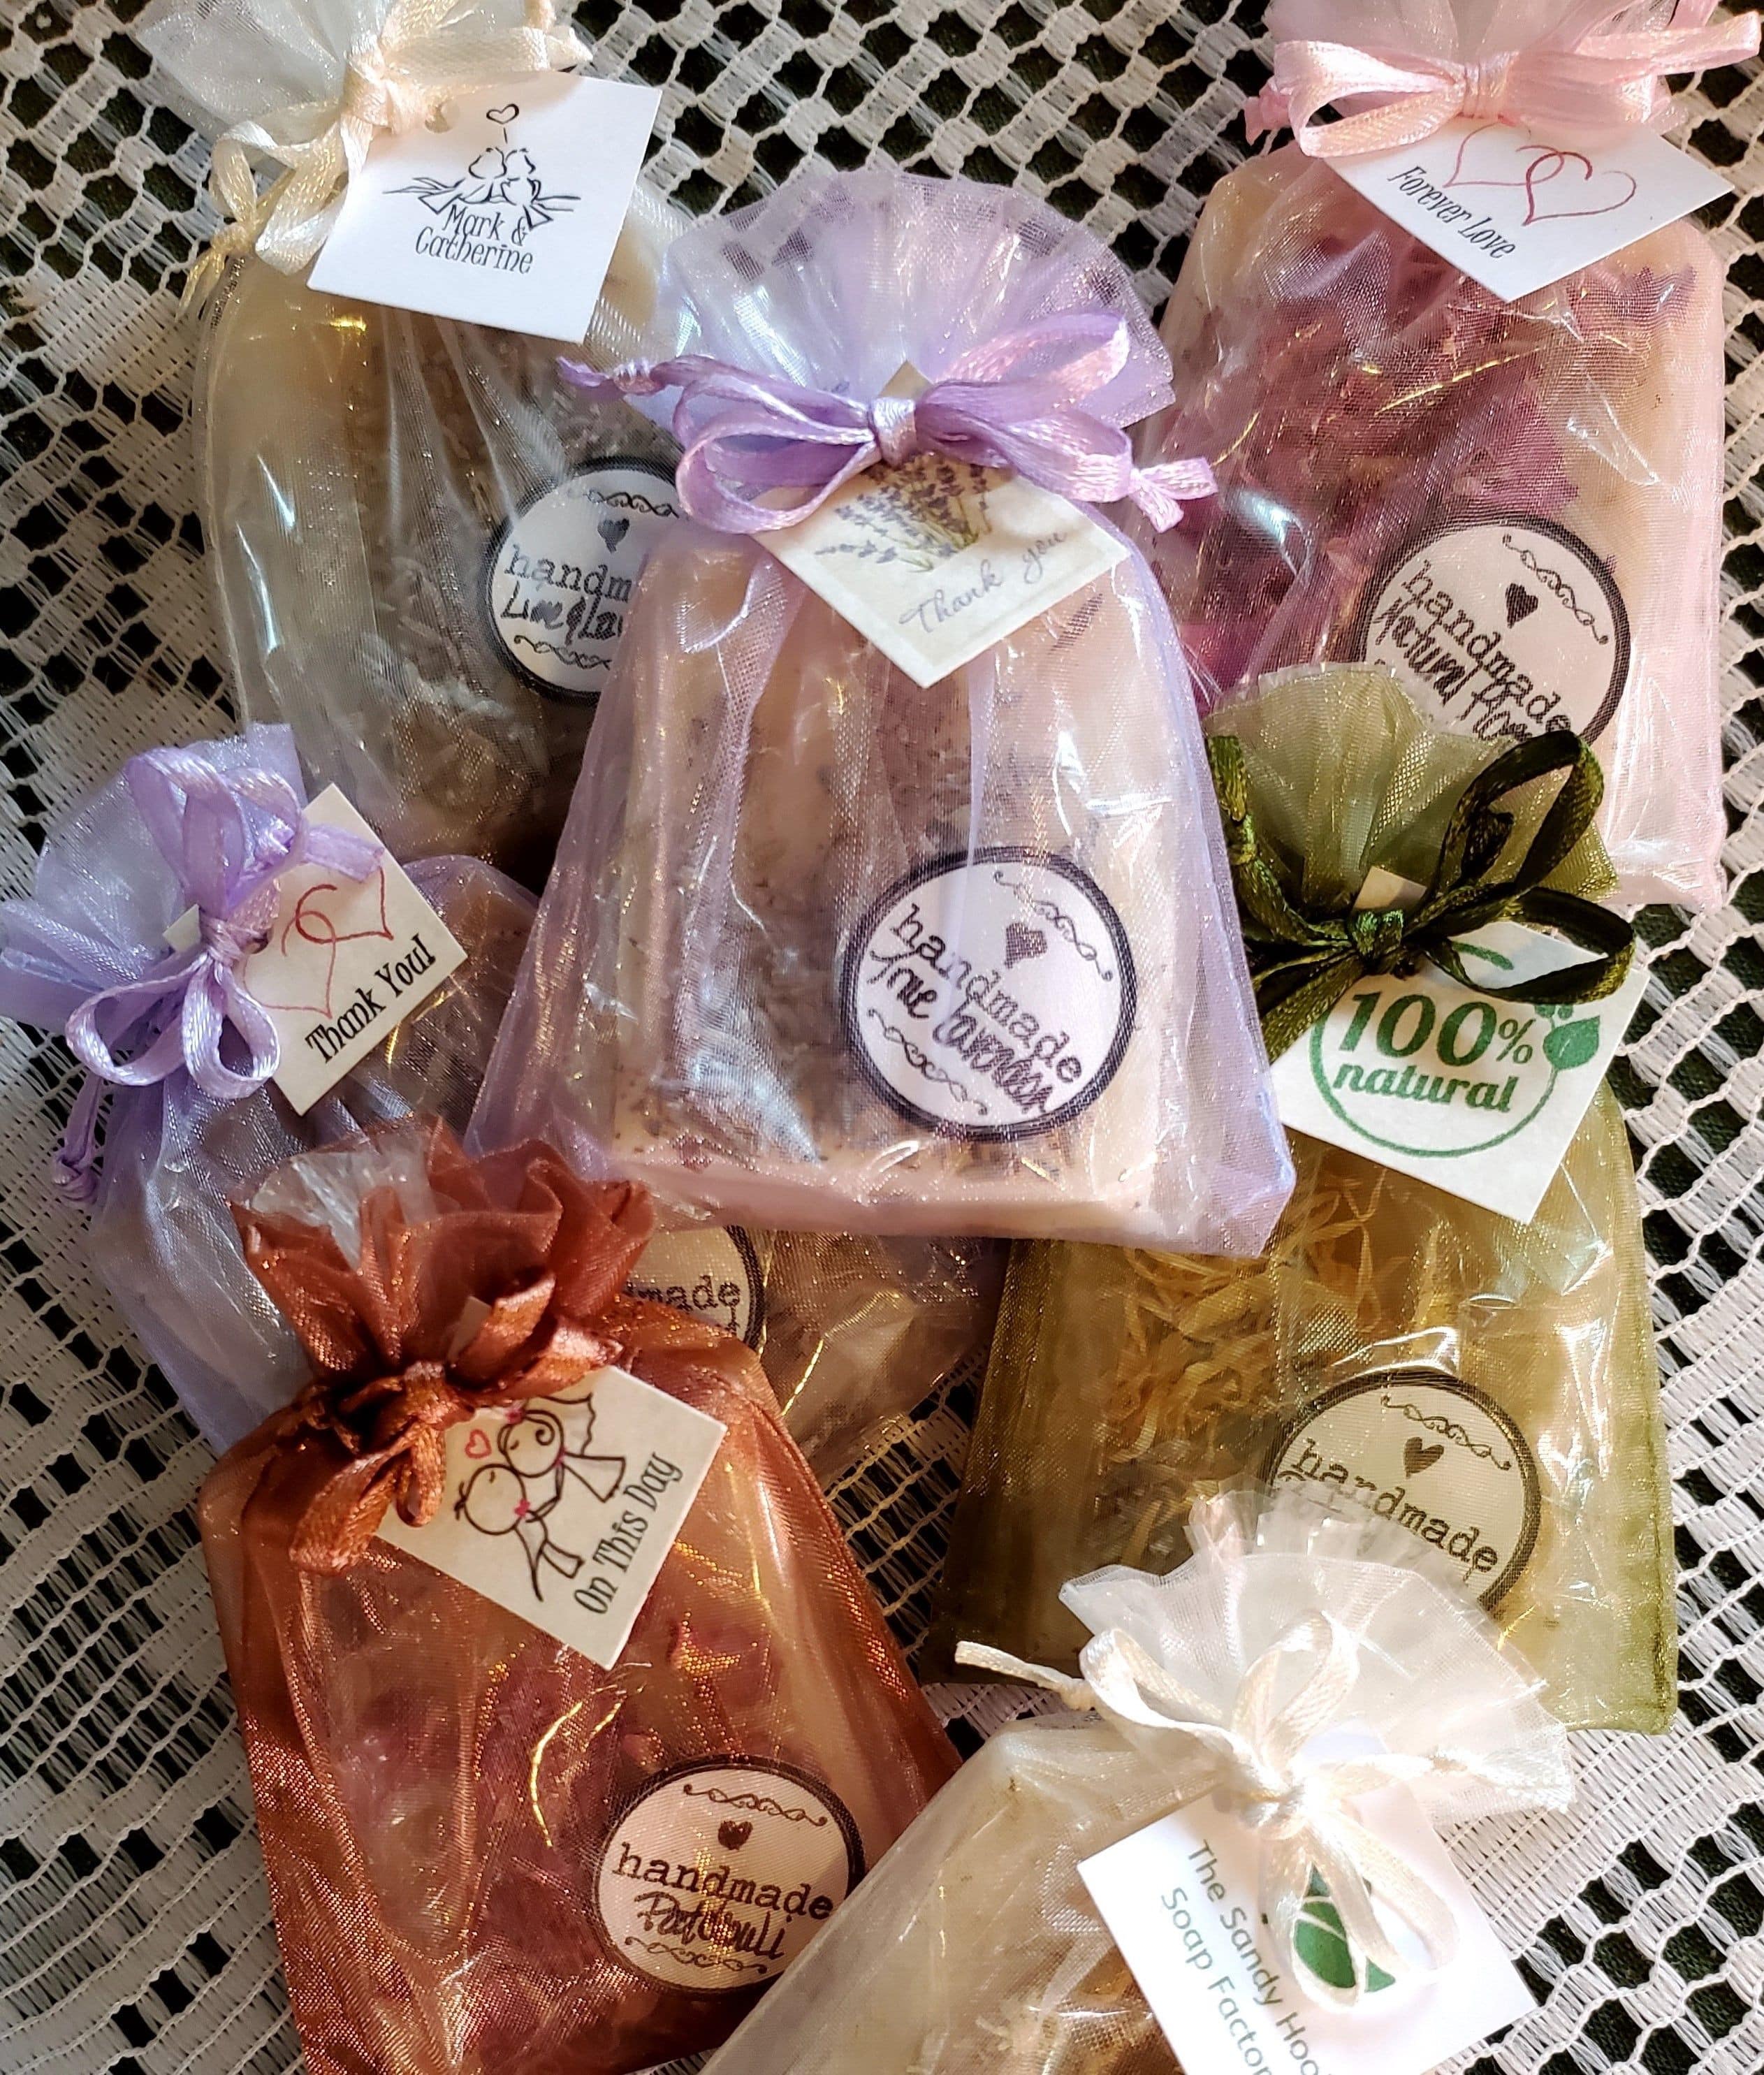 Our Floral Elegance favours are a premium soap favour decorated with organic botanicals and delivered in an organza bag.  Lovely wedding day favour personalized